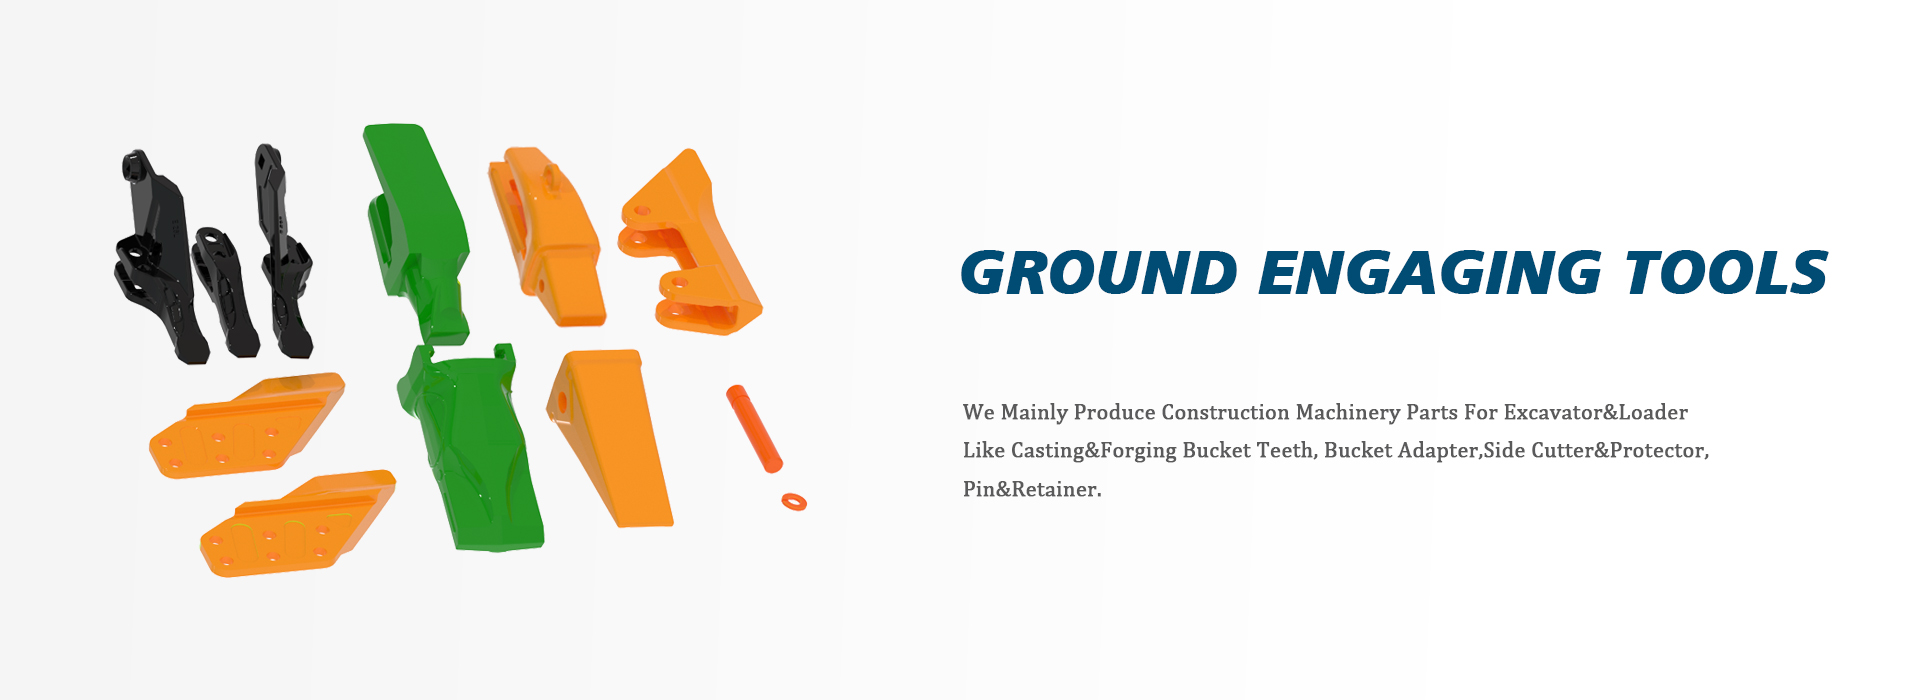 GROUND ENGAGING TOOLS